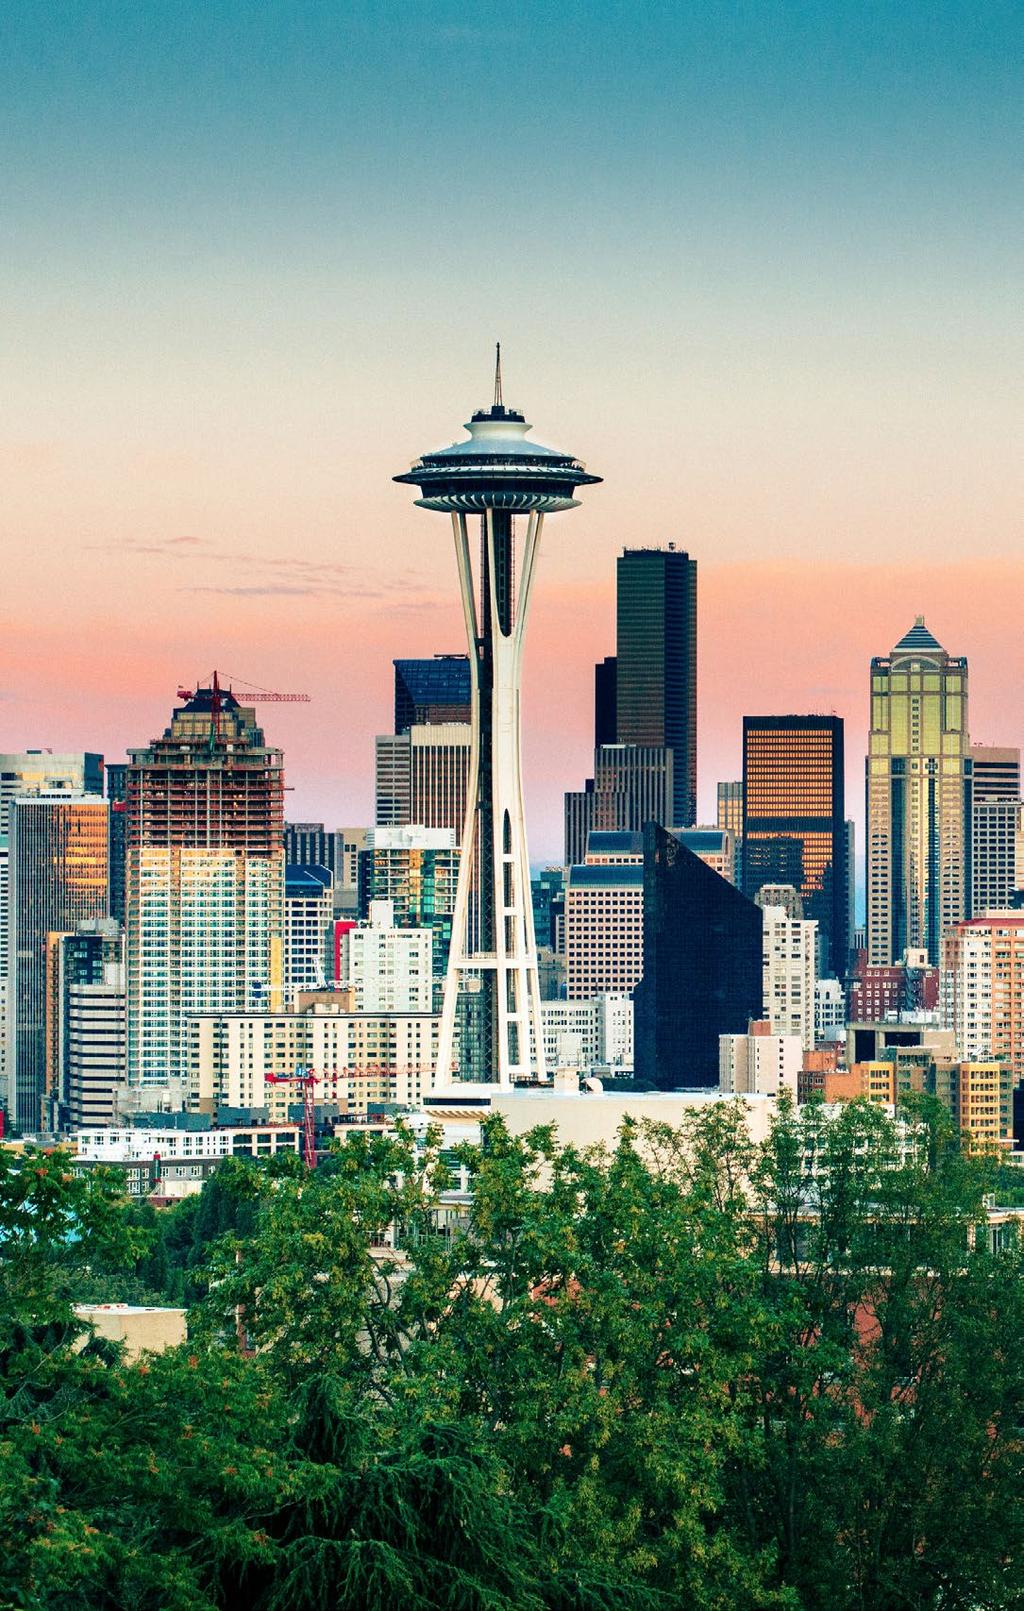 CITY VIBE NATURAL BEAUTY Seattle is one of the fastest-growing, most highly educated major metropolitan markets. From high art to mountain peaks, there is something to interest everyone.